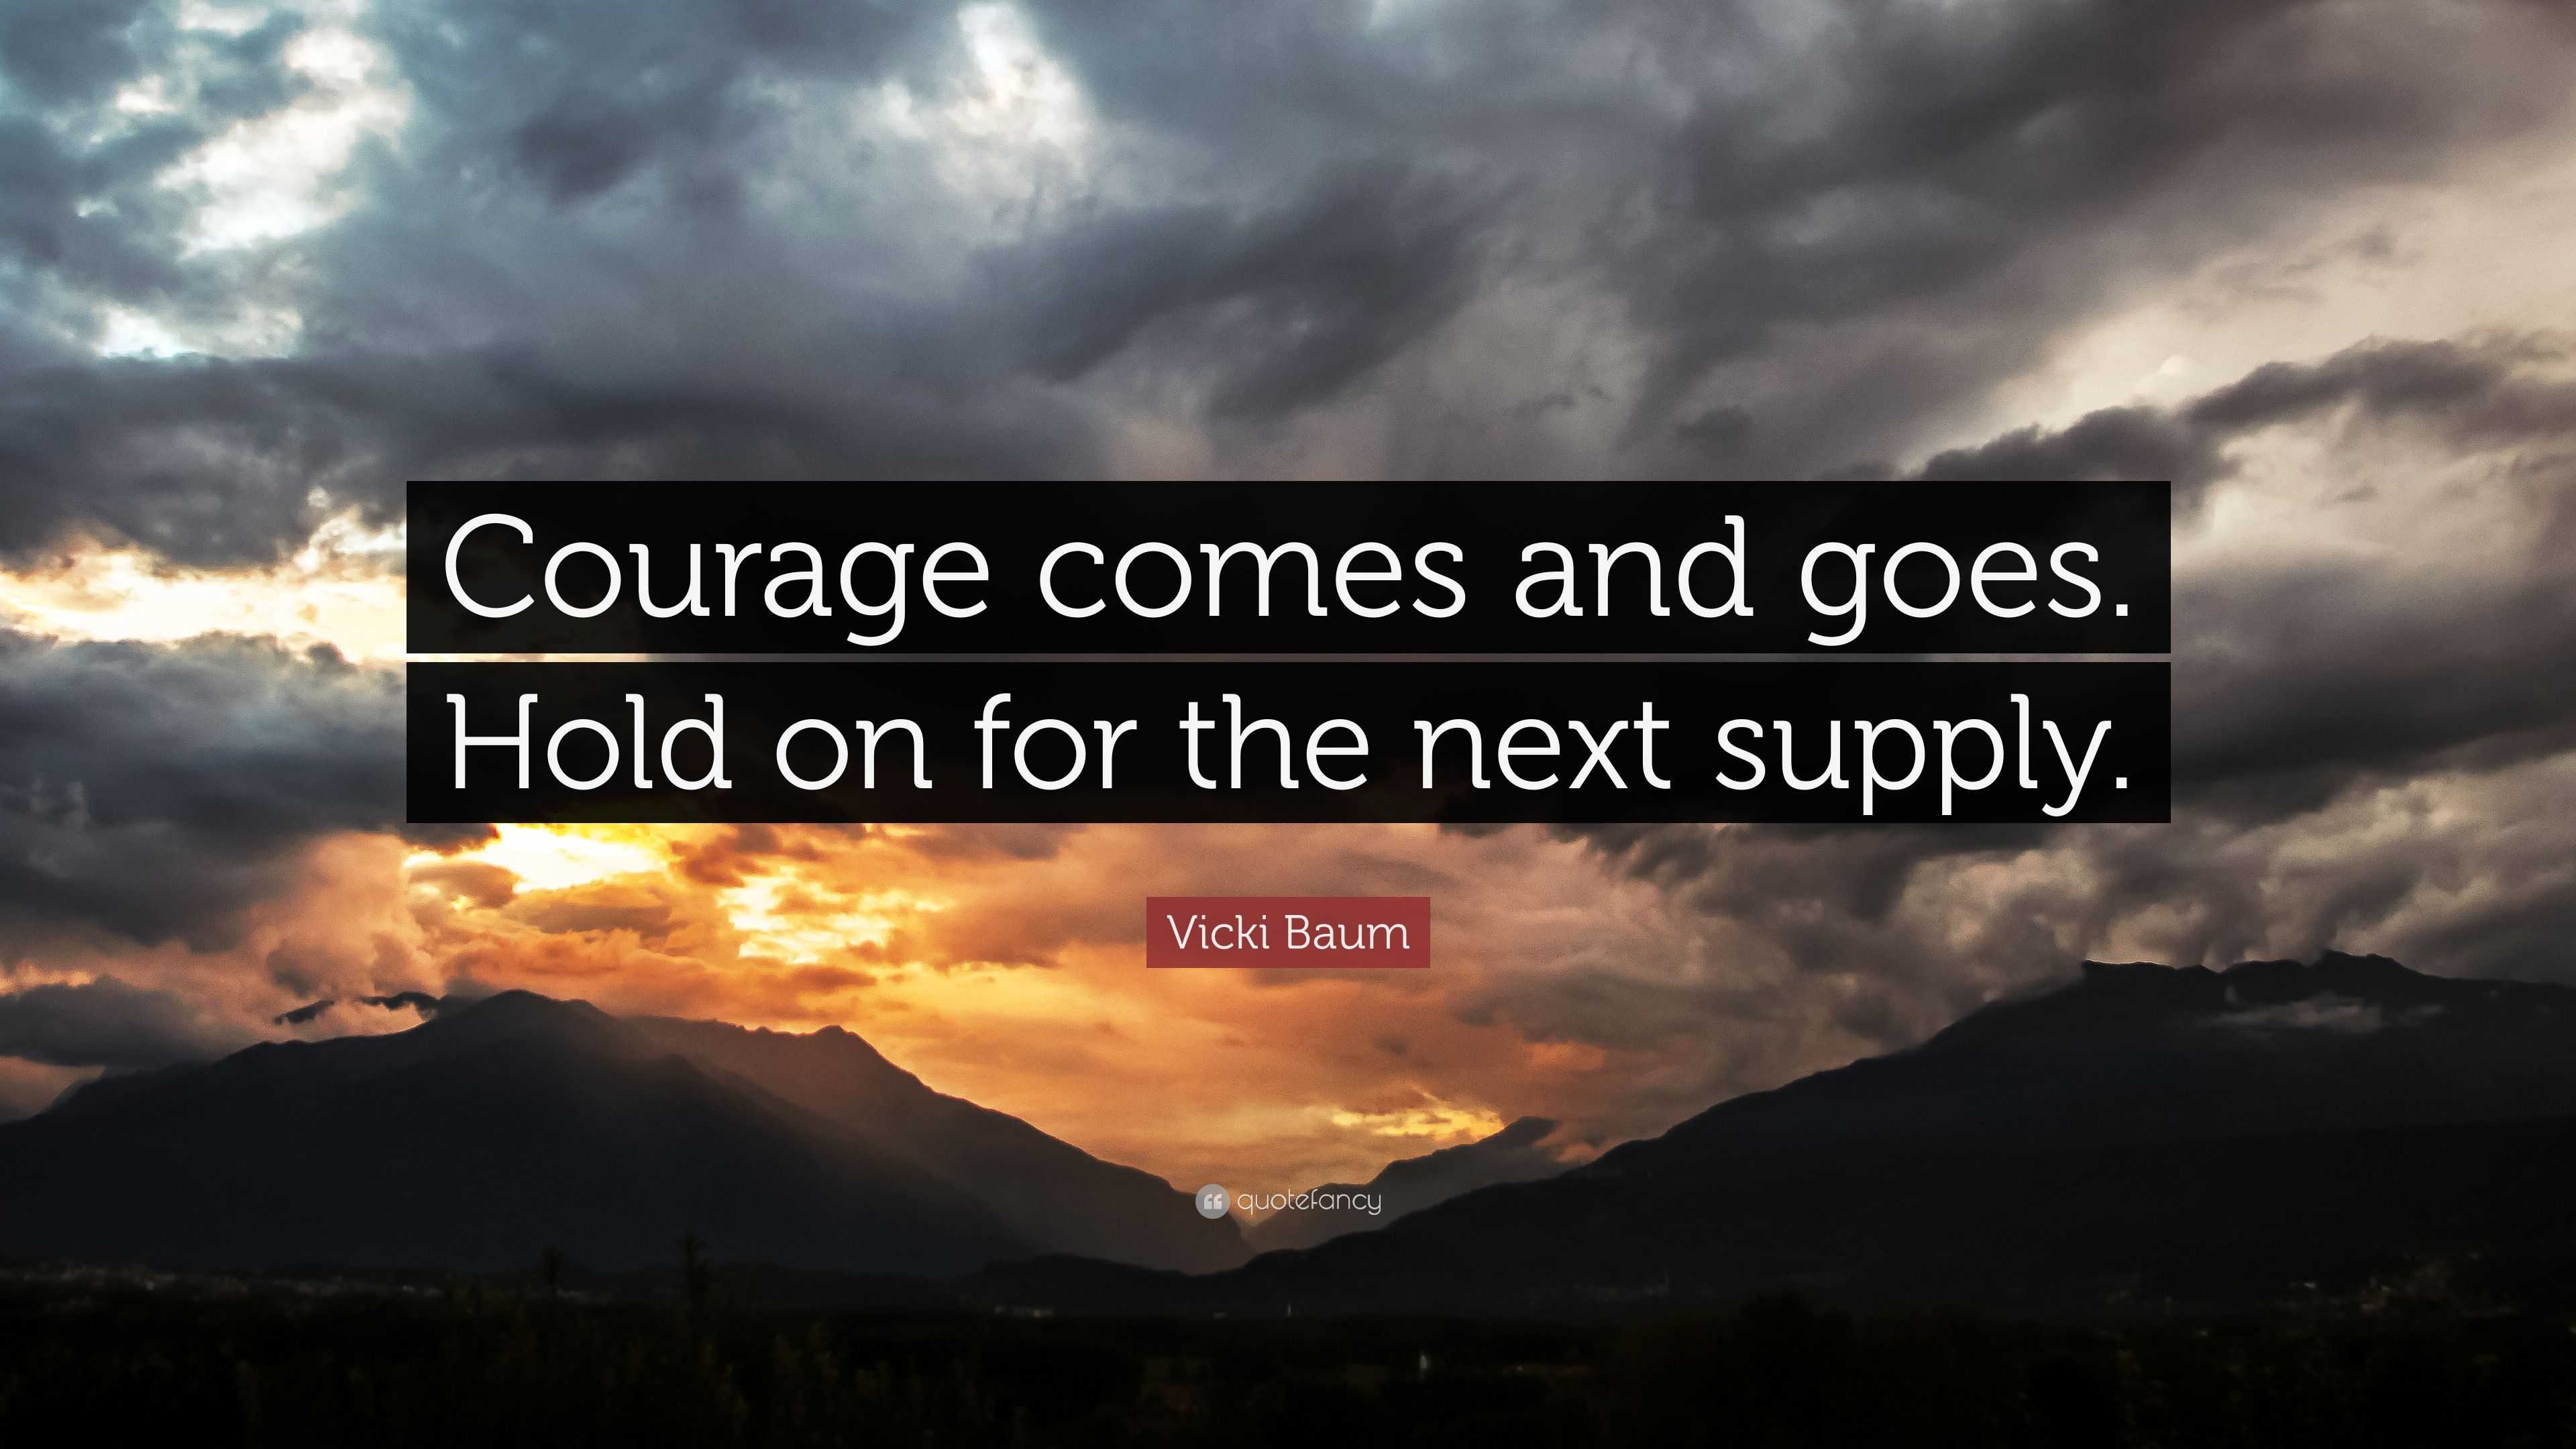 Vicki Baum Quote: “Courage comes and goes. Hold on for the next